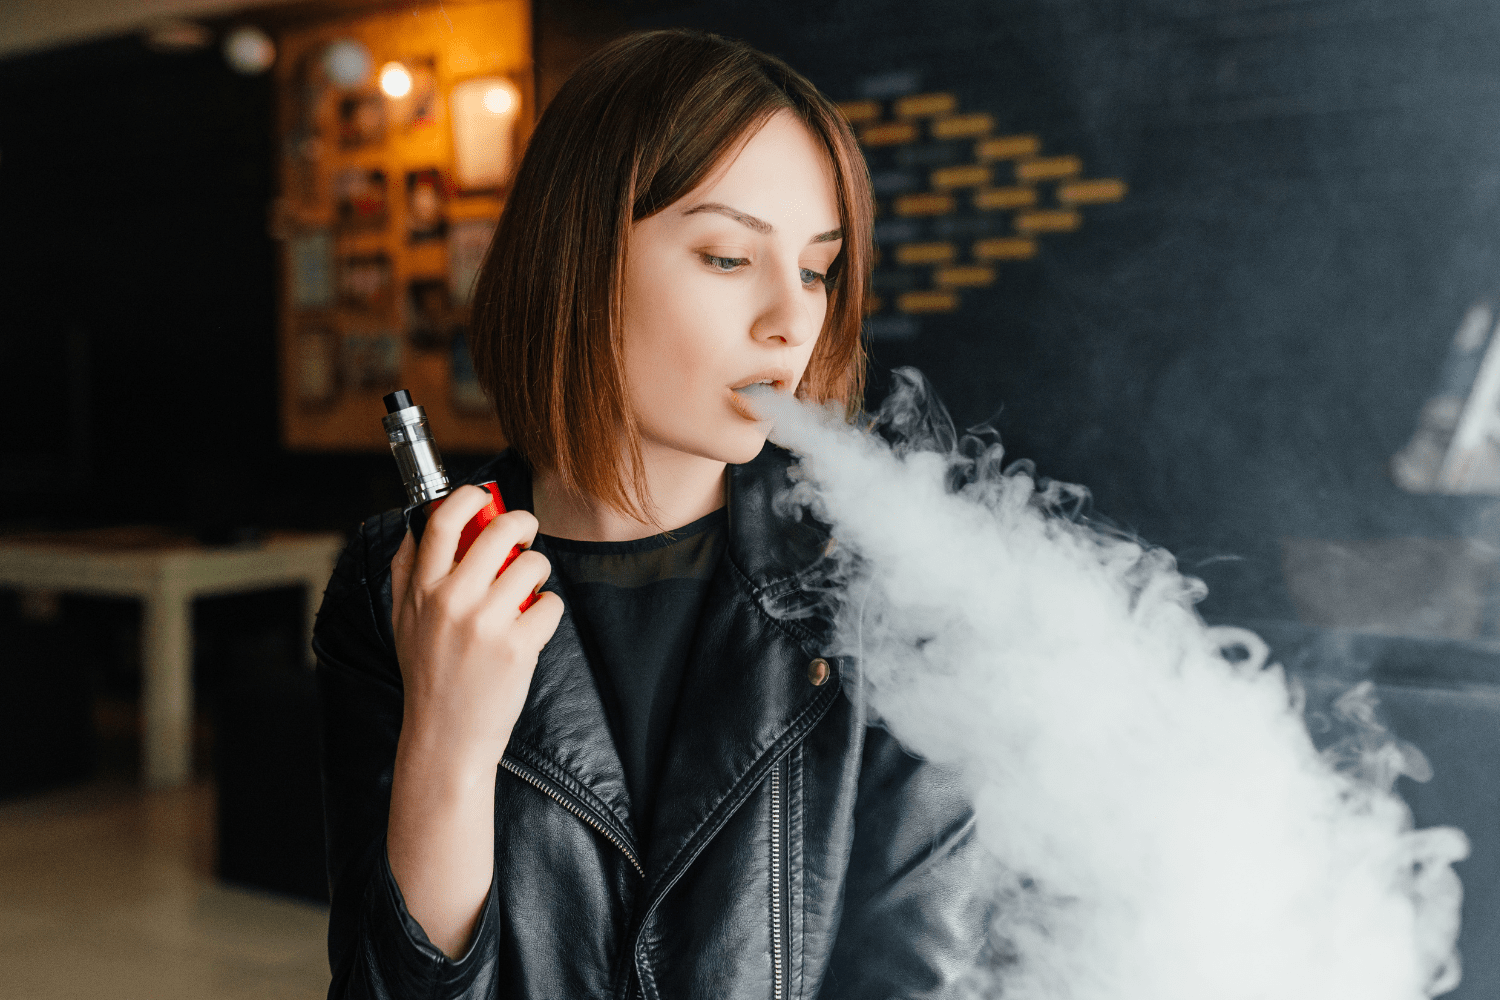 Girl dressed in black leather jacket vaping from a red vape.